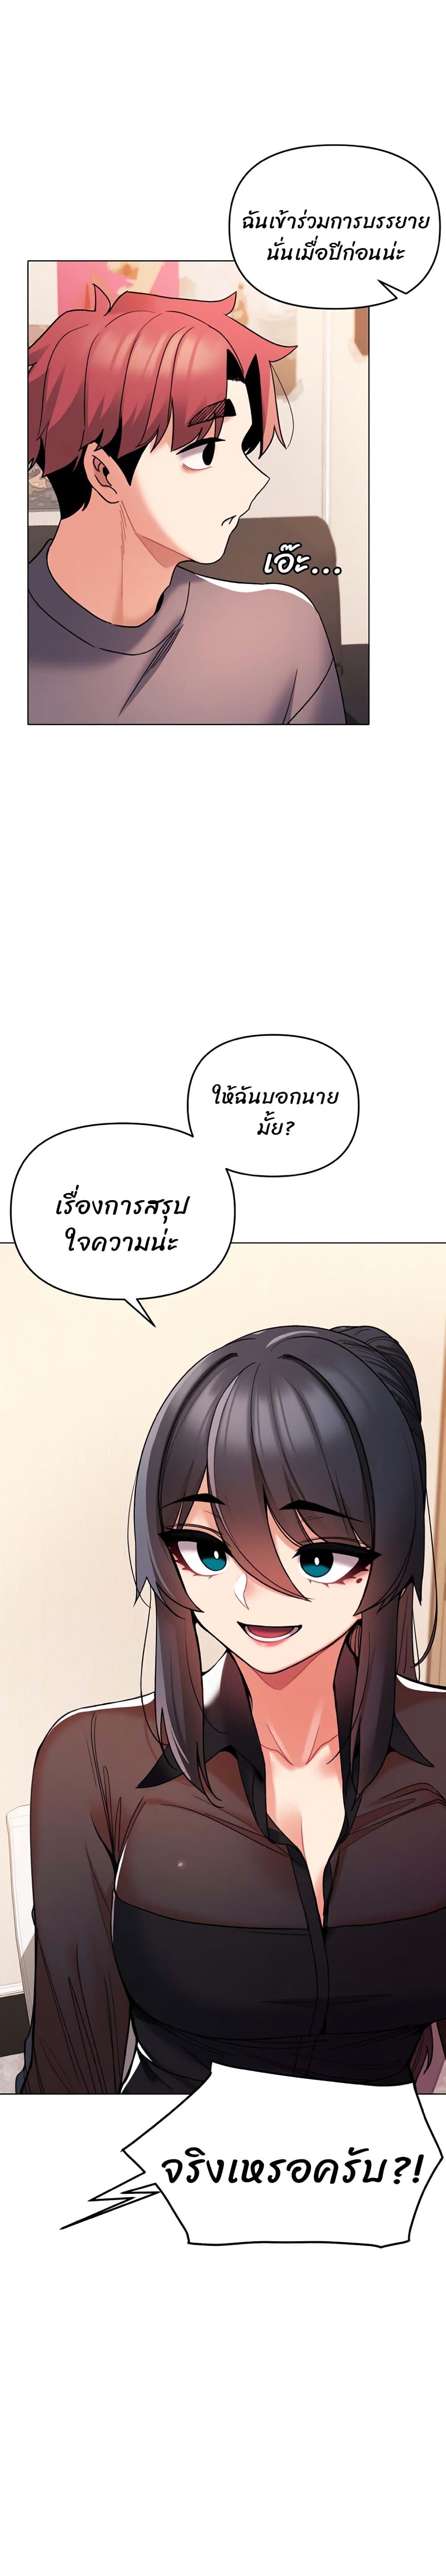 College Life Starts With Clubs 56 ภาพที่ 7